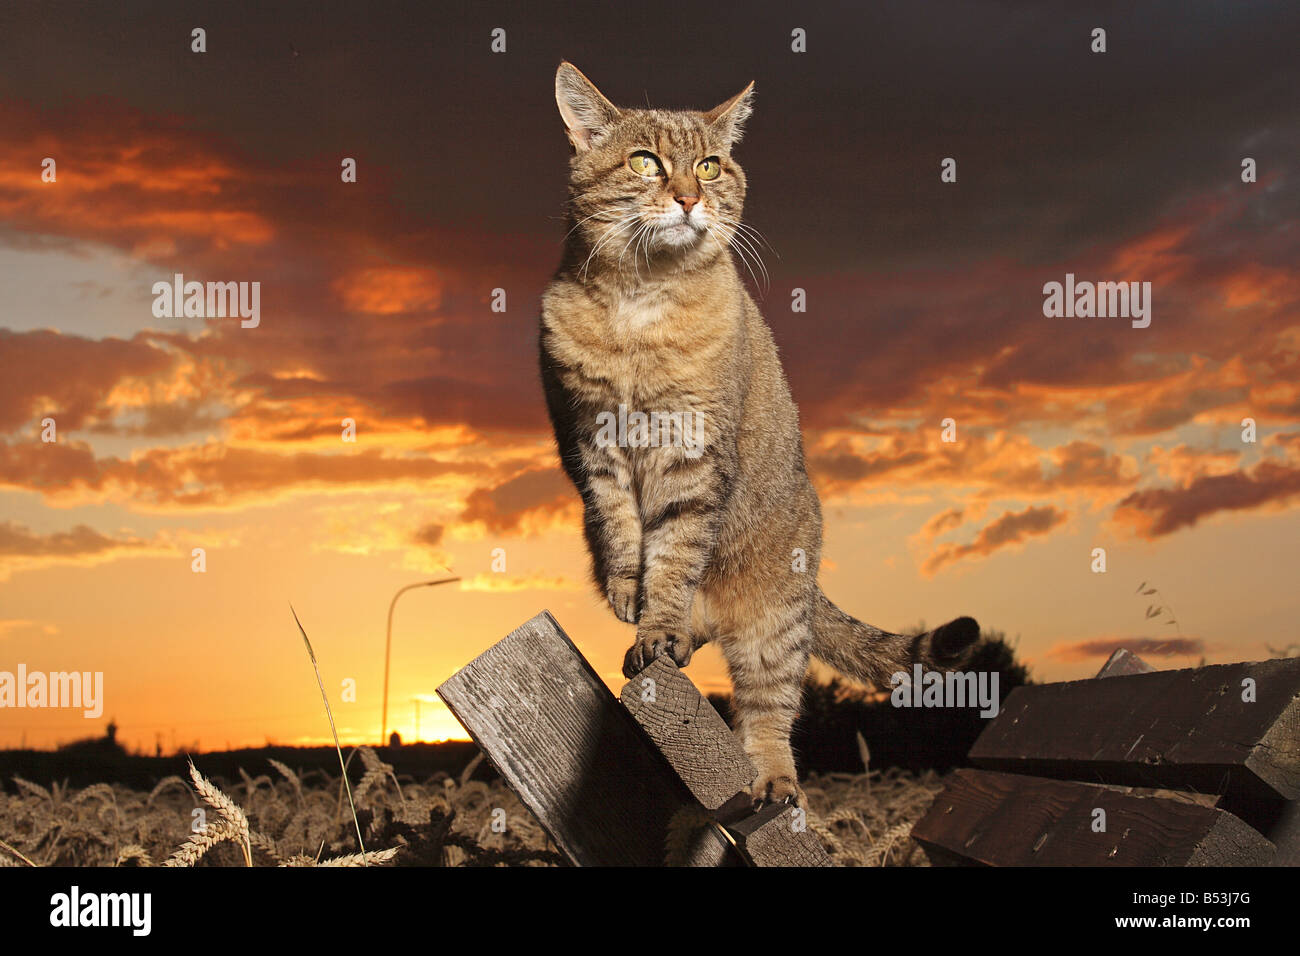 tabby domestic cat - standing on wooden board Stock Photo